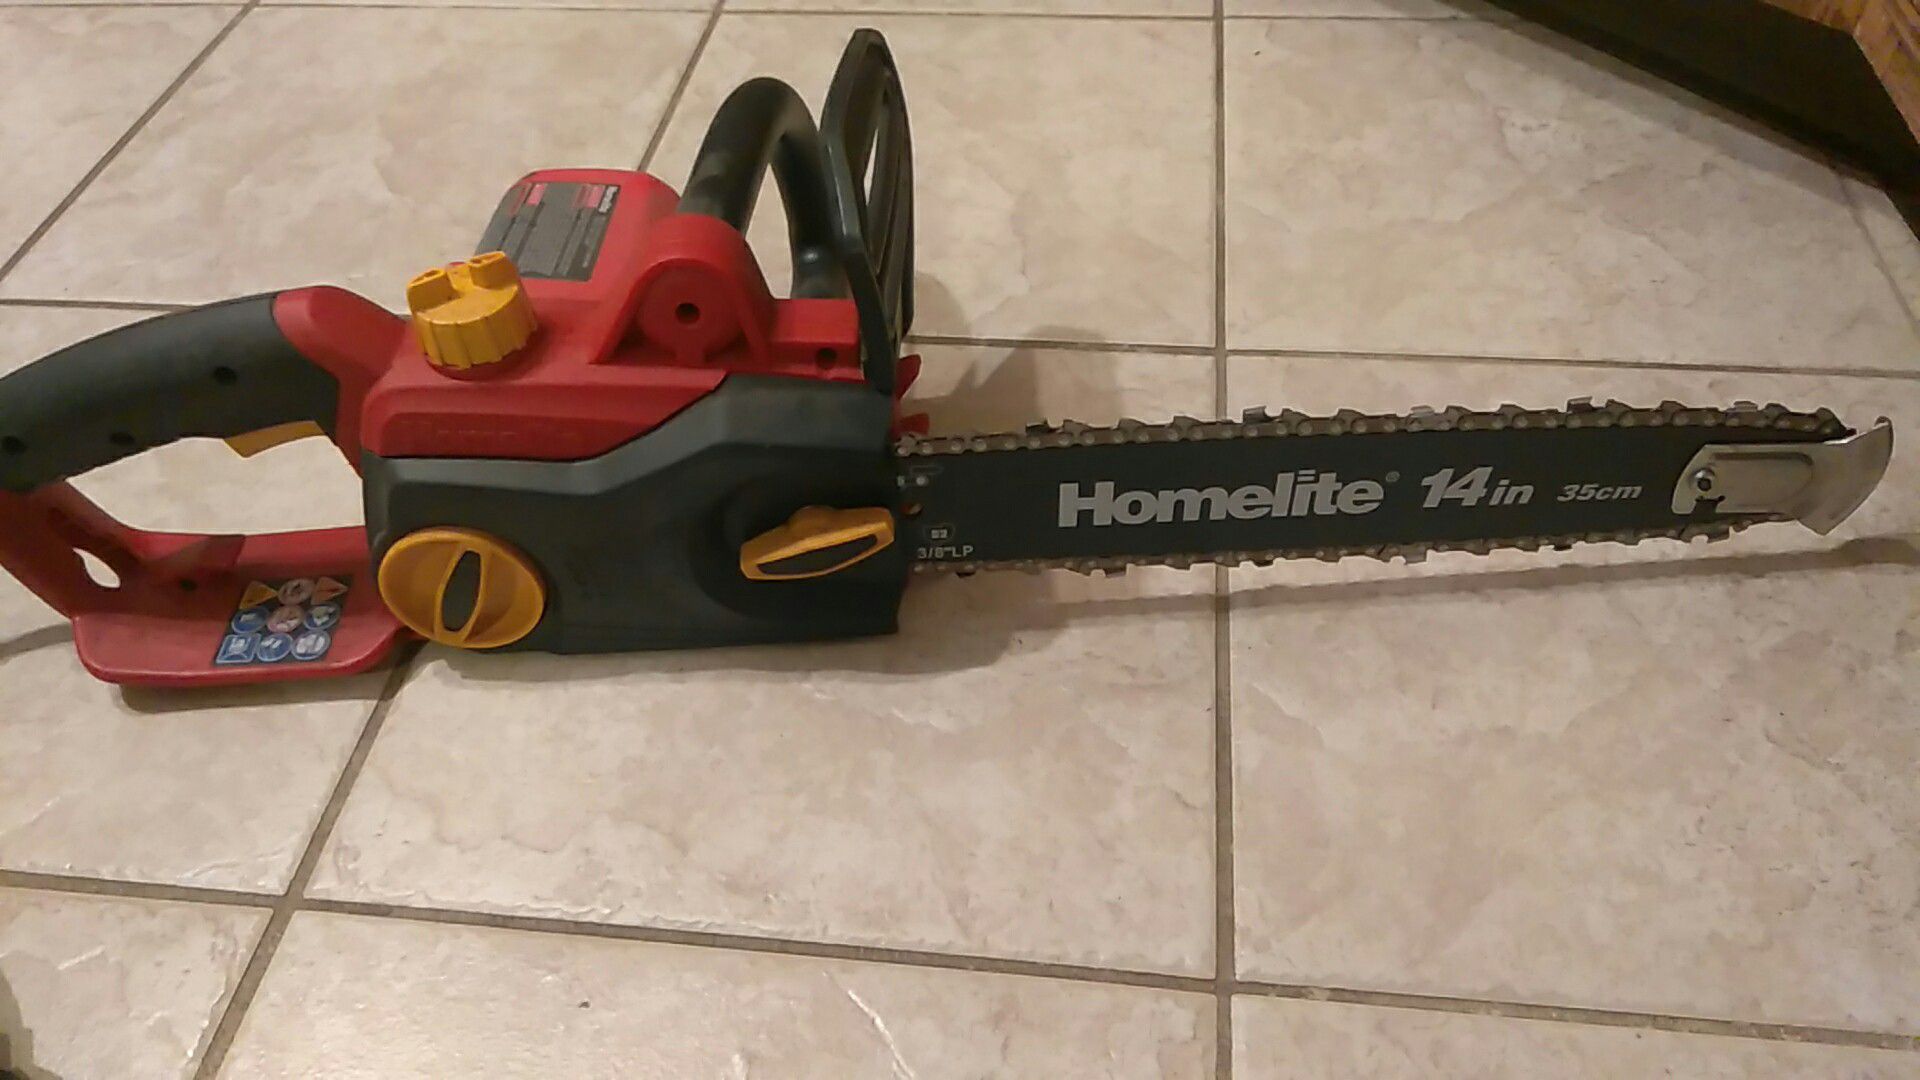 Chainsaw Homelite electric 14"